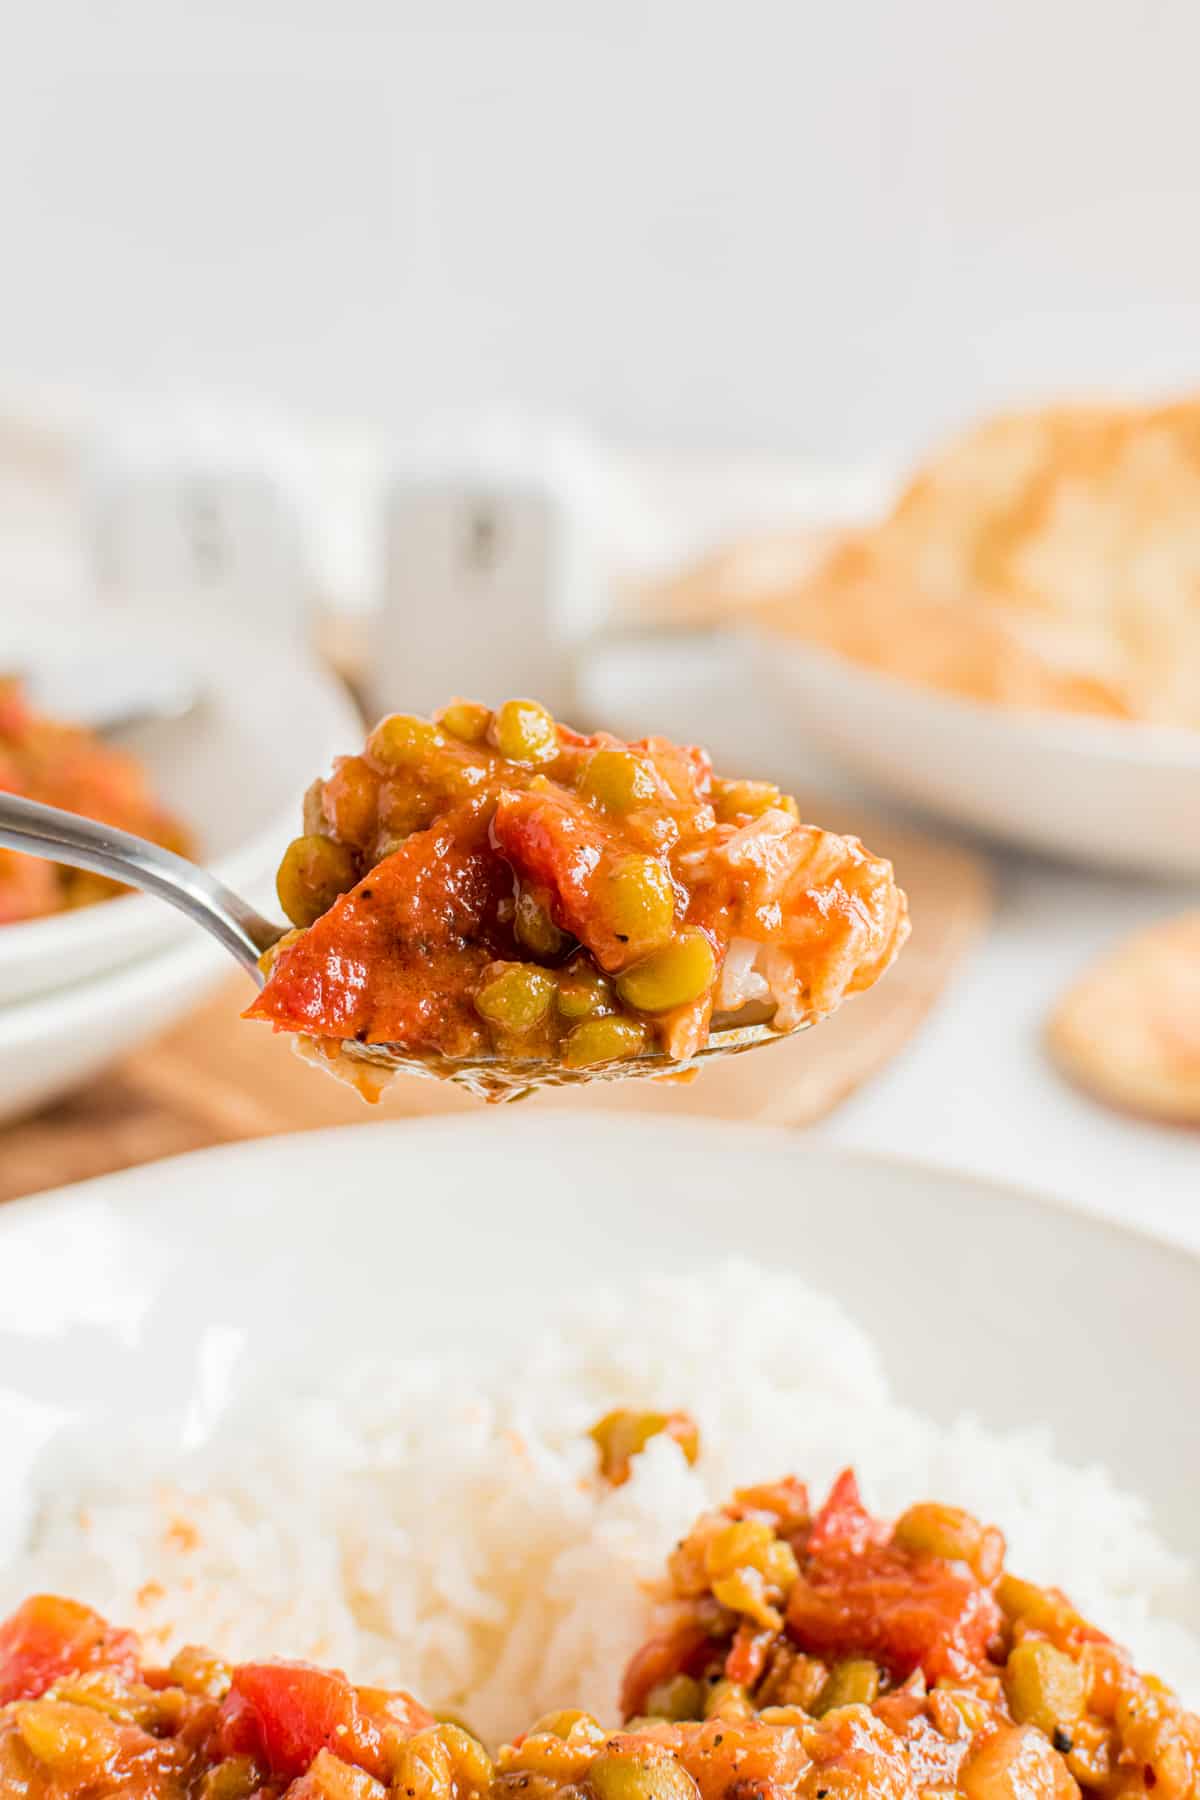 A spoon holds a bite full of Split Pea Curry.